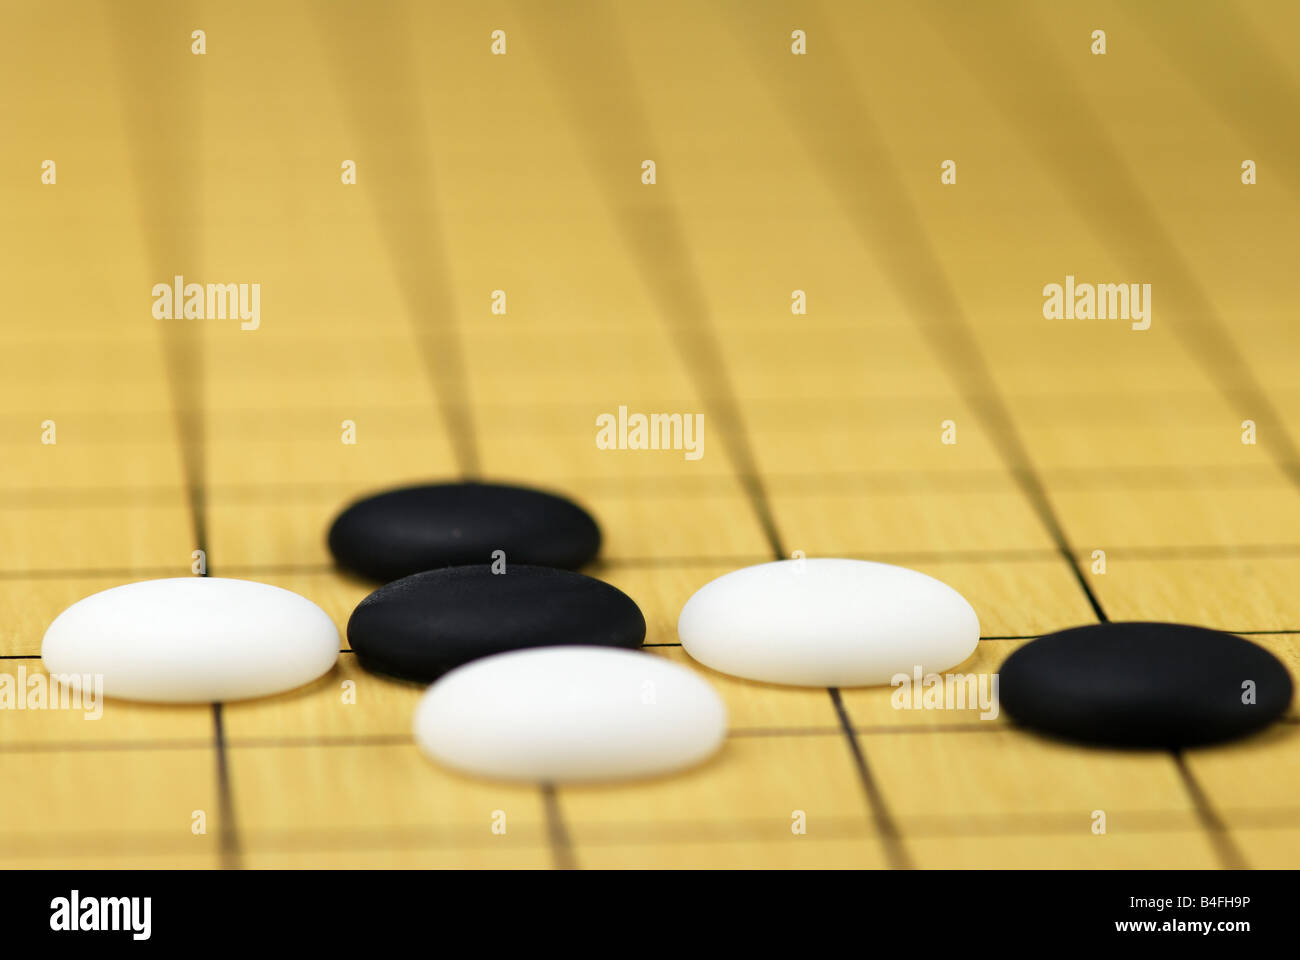 close up detail of the stones on the goban during a game of Go Stock Photo